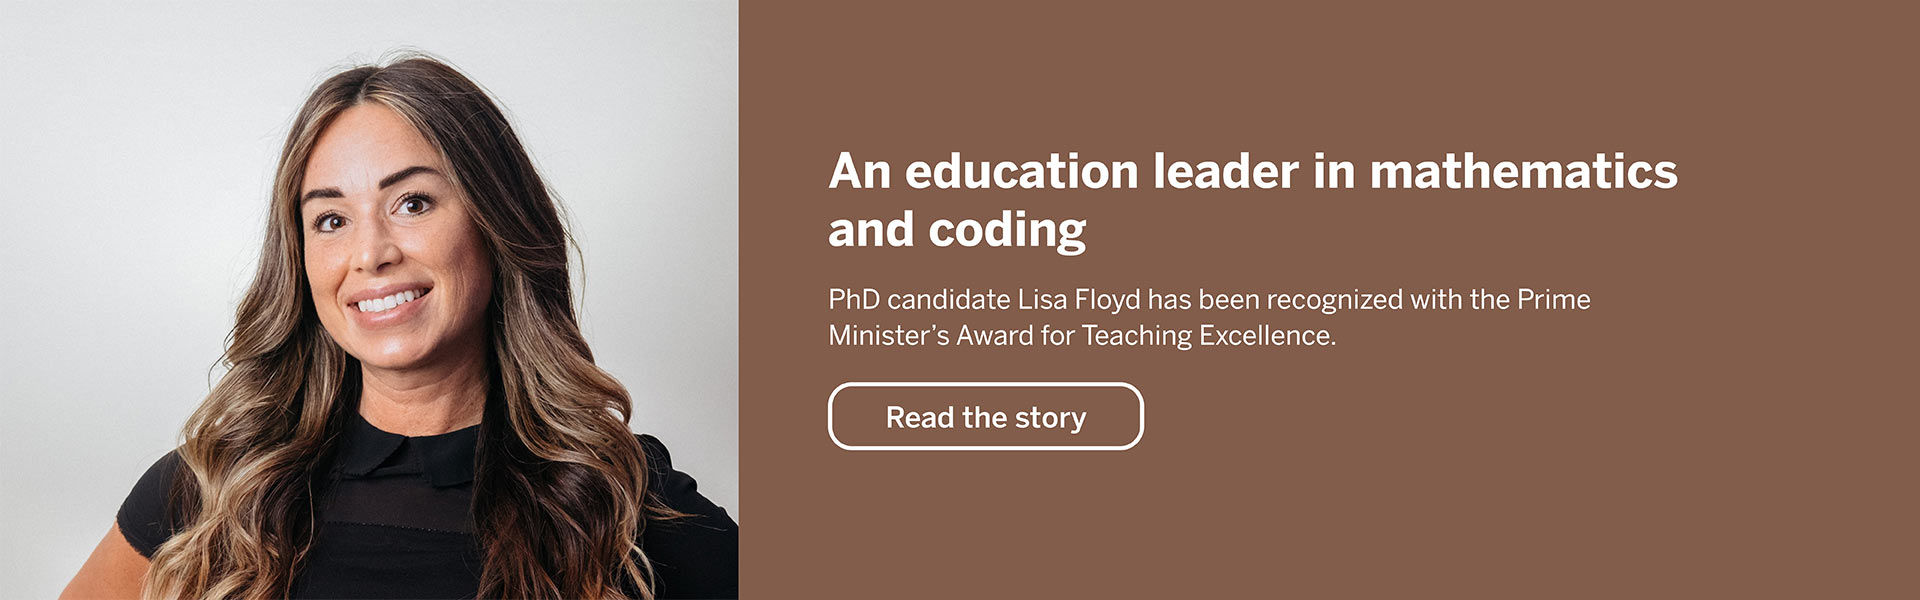 An education leader in mathmatics and coding. PhD candidate Lisa Floyd has been recognized with the Prim Ministers award for Teaching Excellence. Read the Story